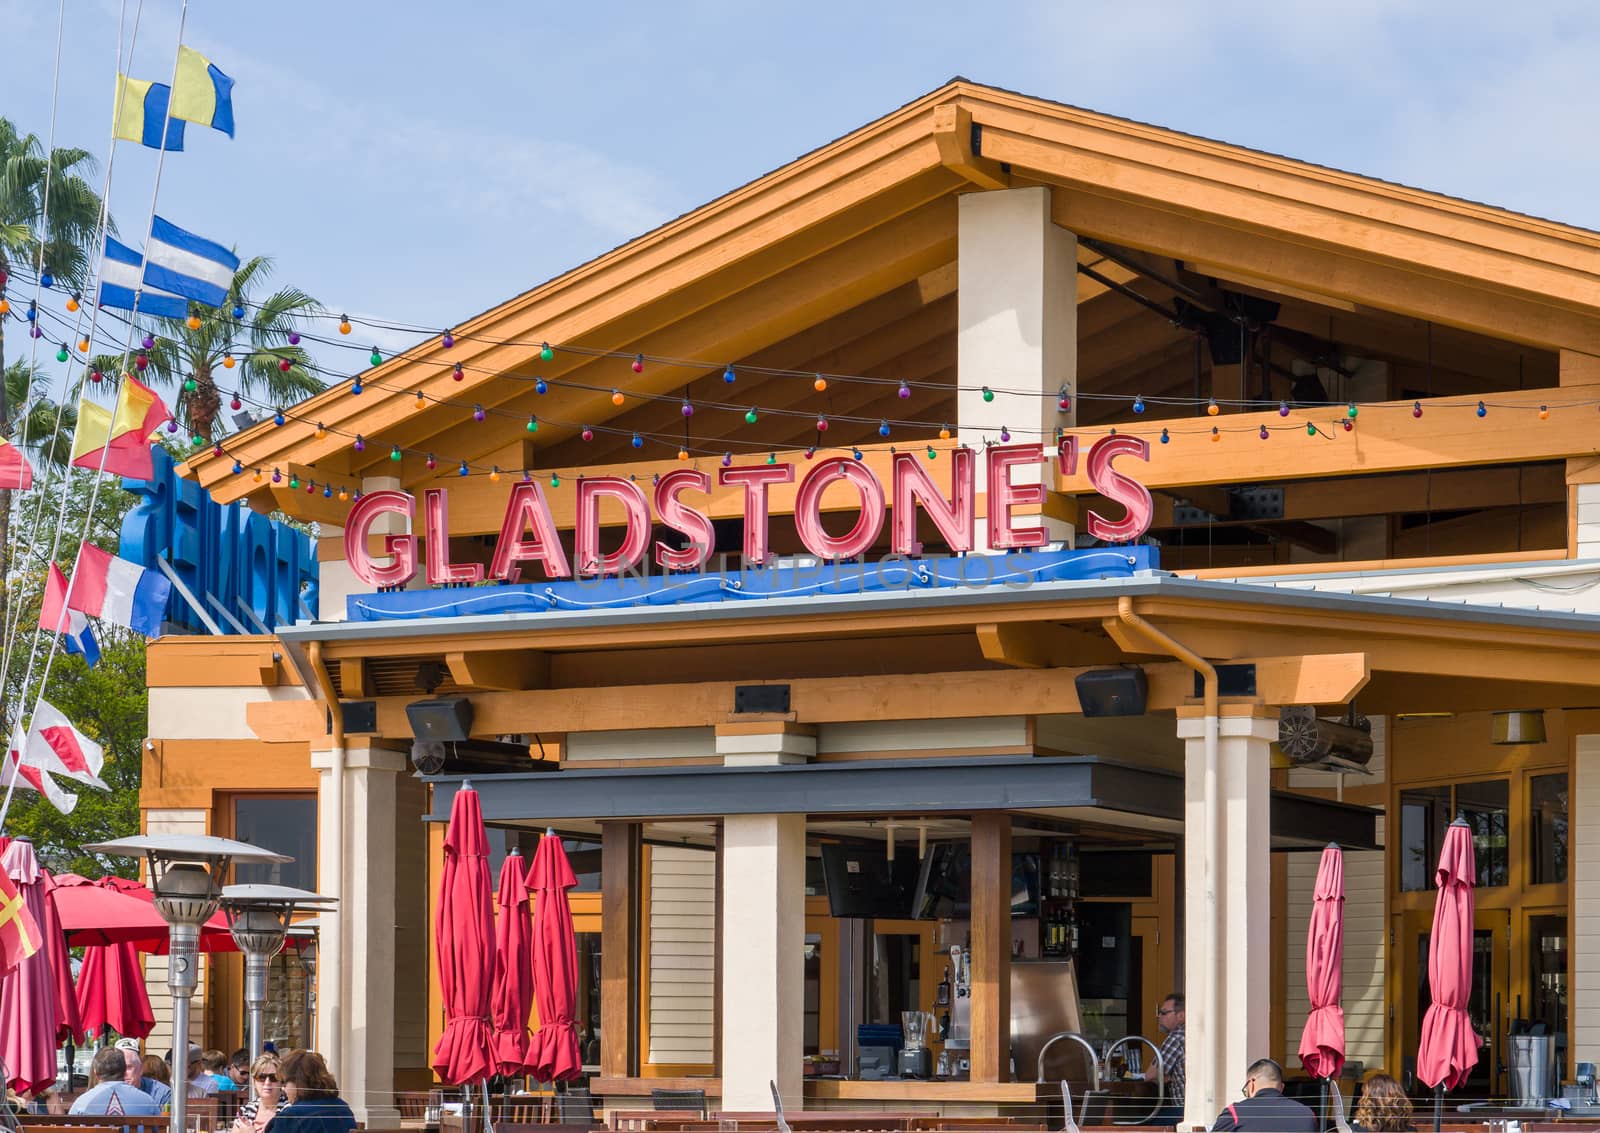 Gladstone's Restaurant Exterior and Sign by wolterk